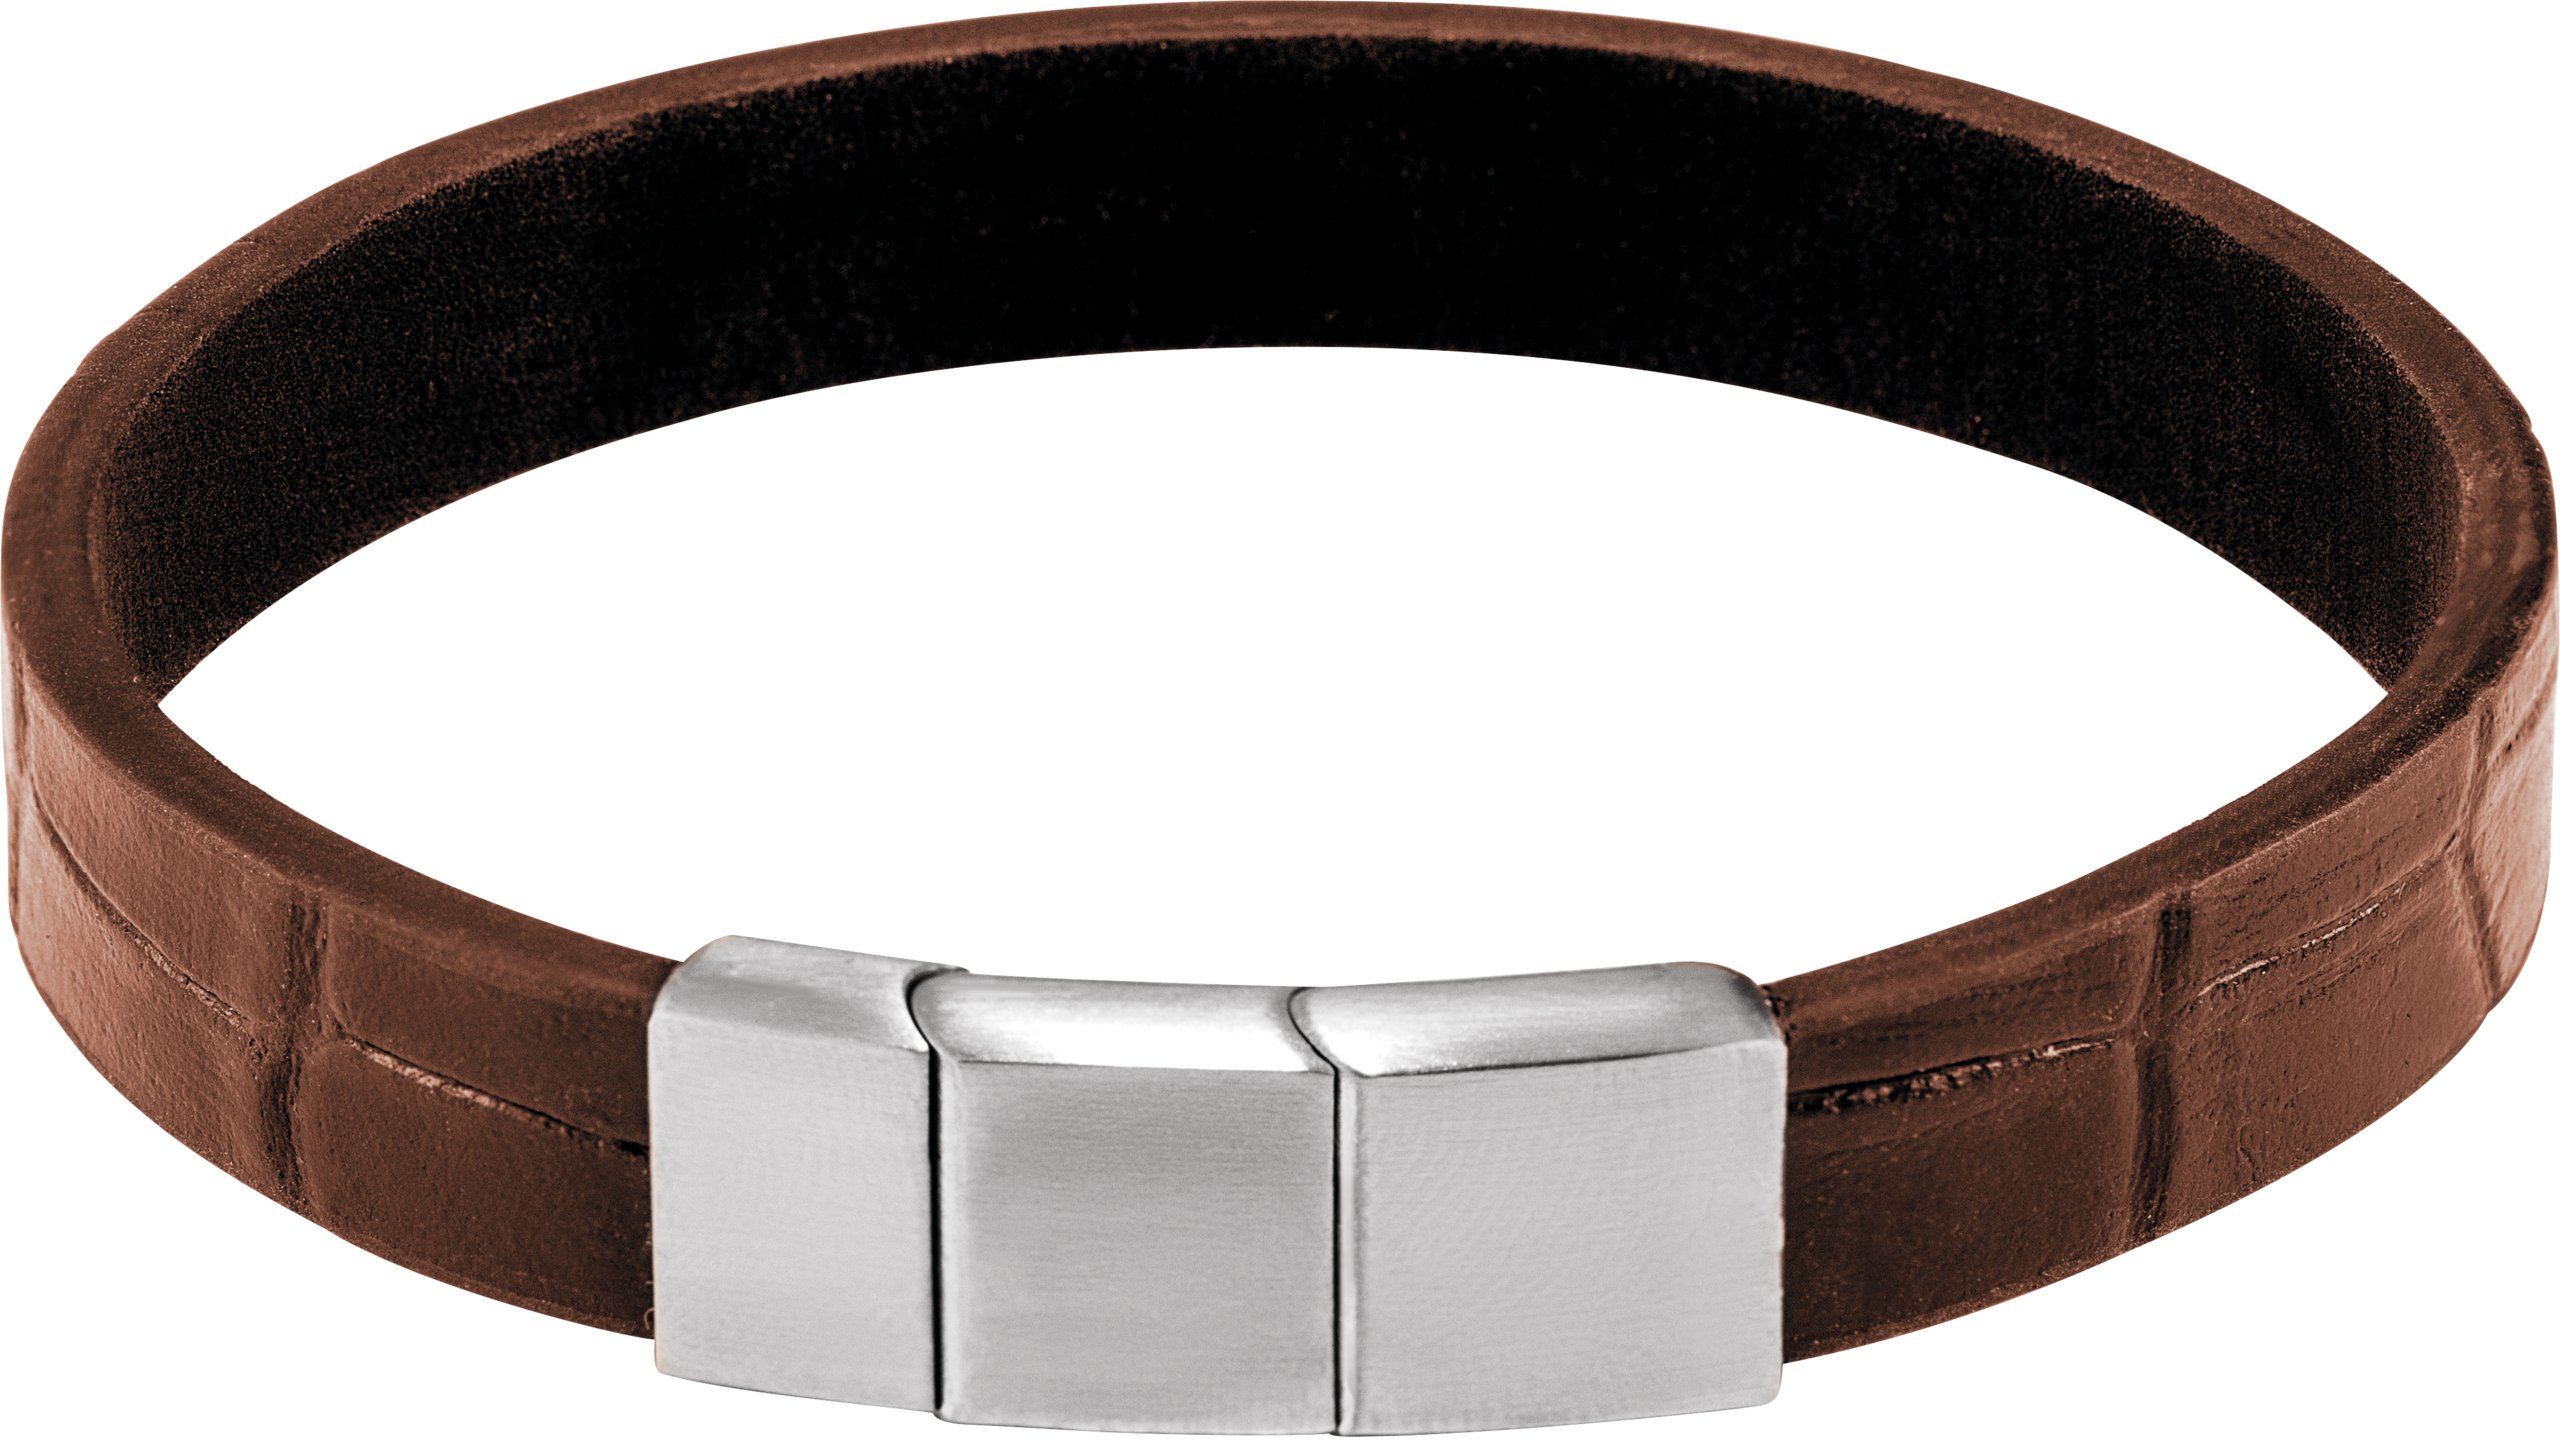 Stainless Steel 11 mm Brown Leather 9" Bracelet